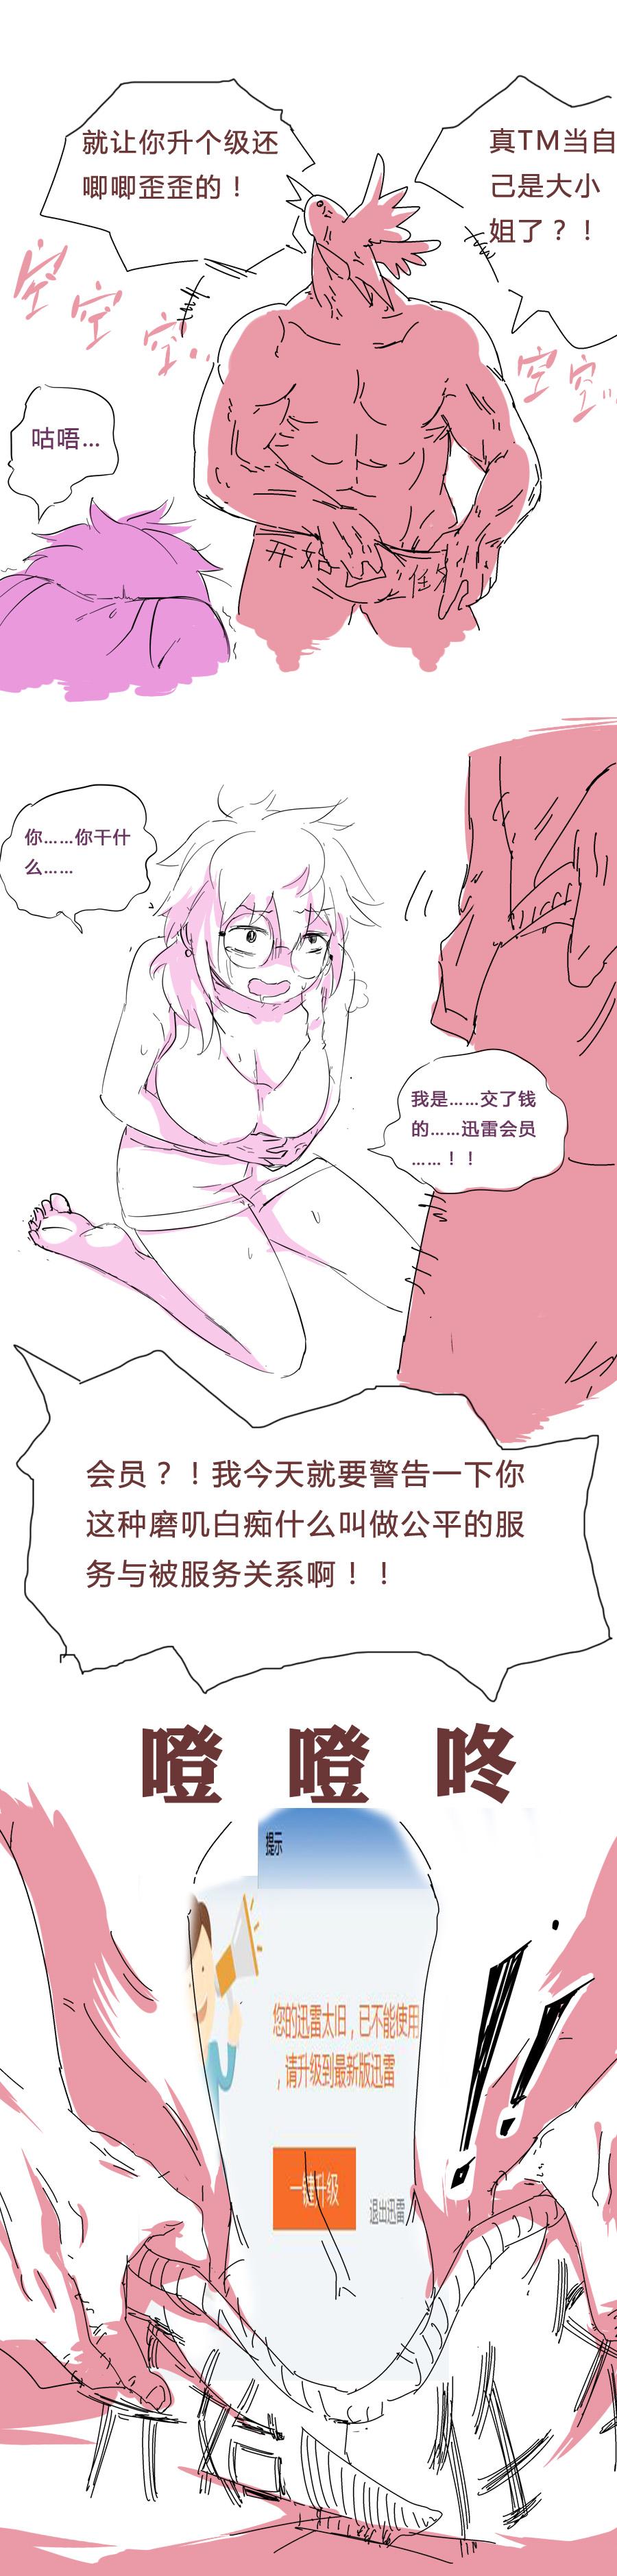 Blows 用户奸狱 Kissing - Page 3